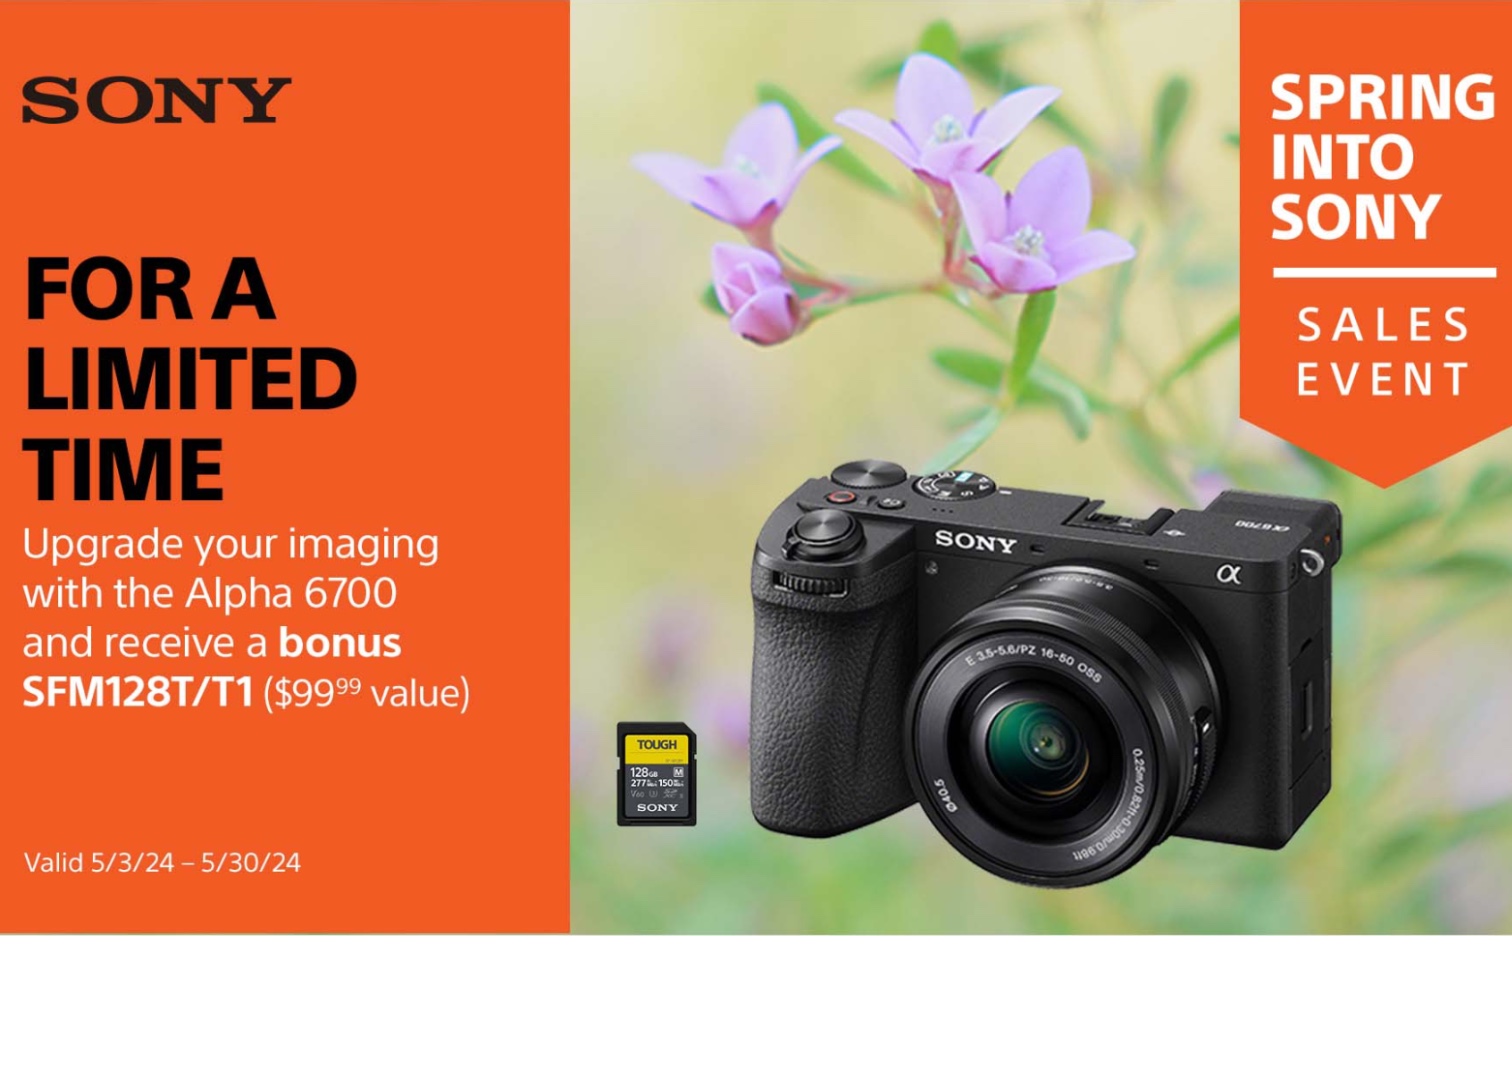 Great offer on the Sony a6700